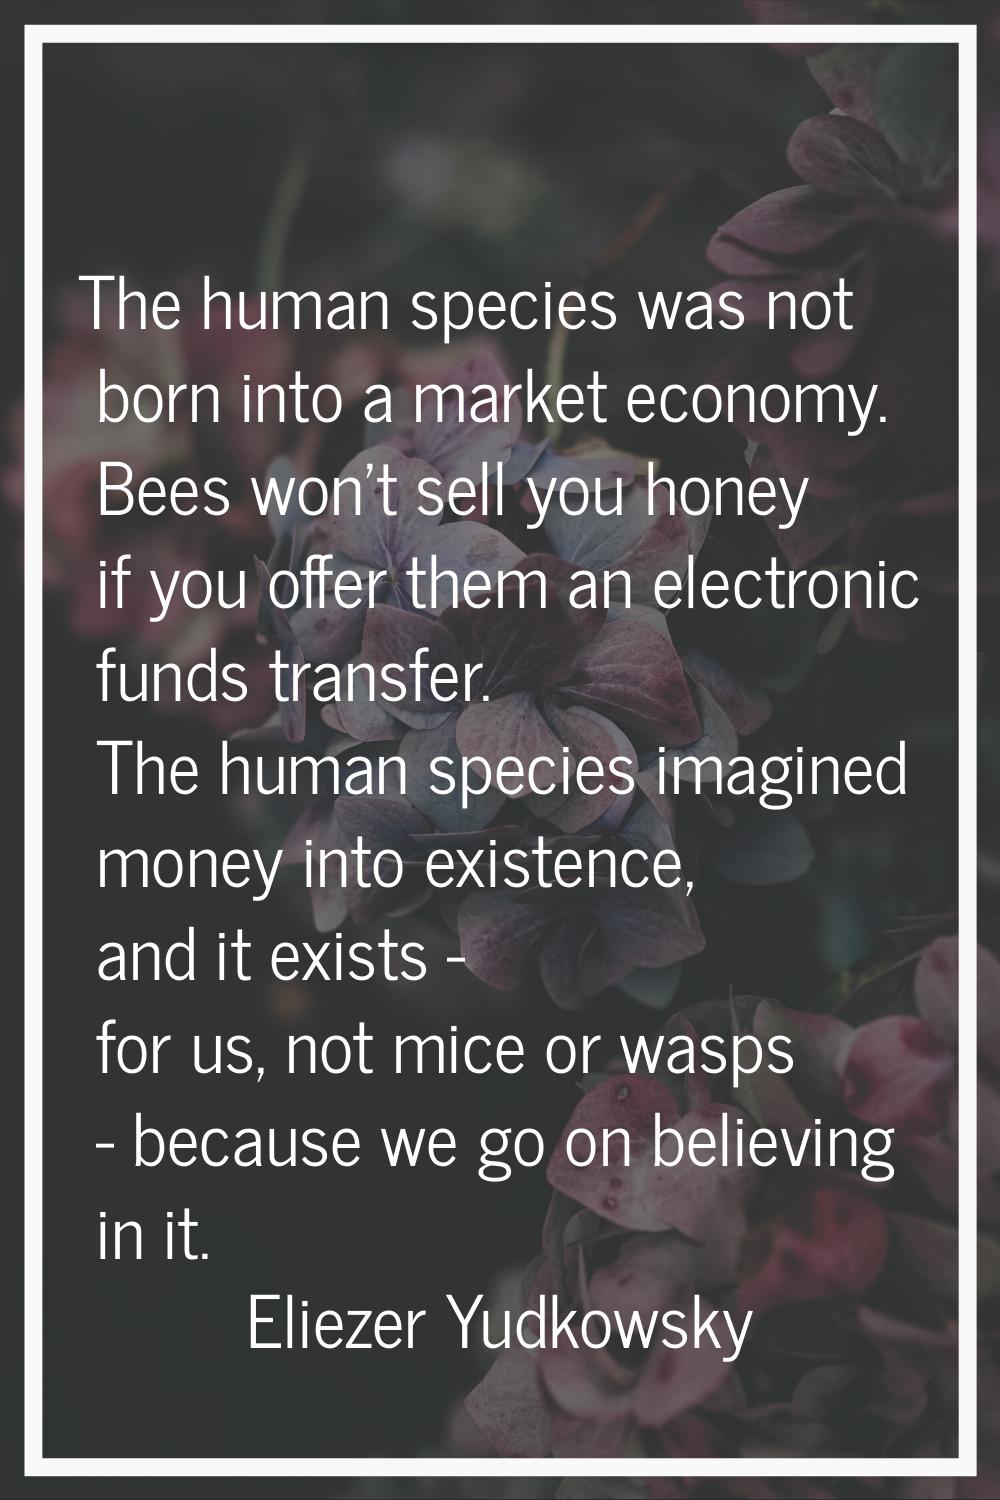 The human species was not born into a market economy. Bees won't sell you honey if you offer them a